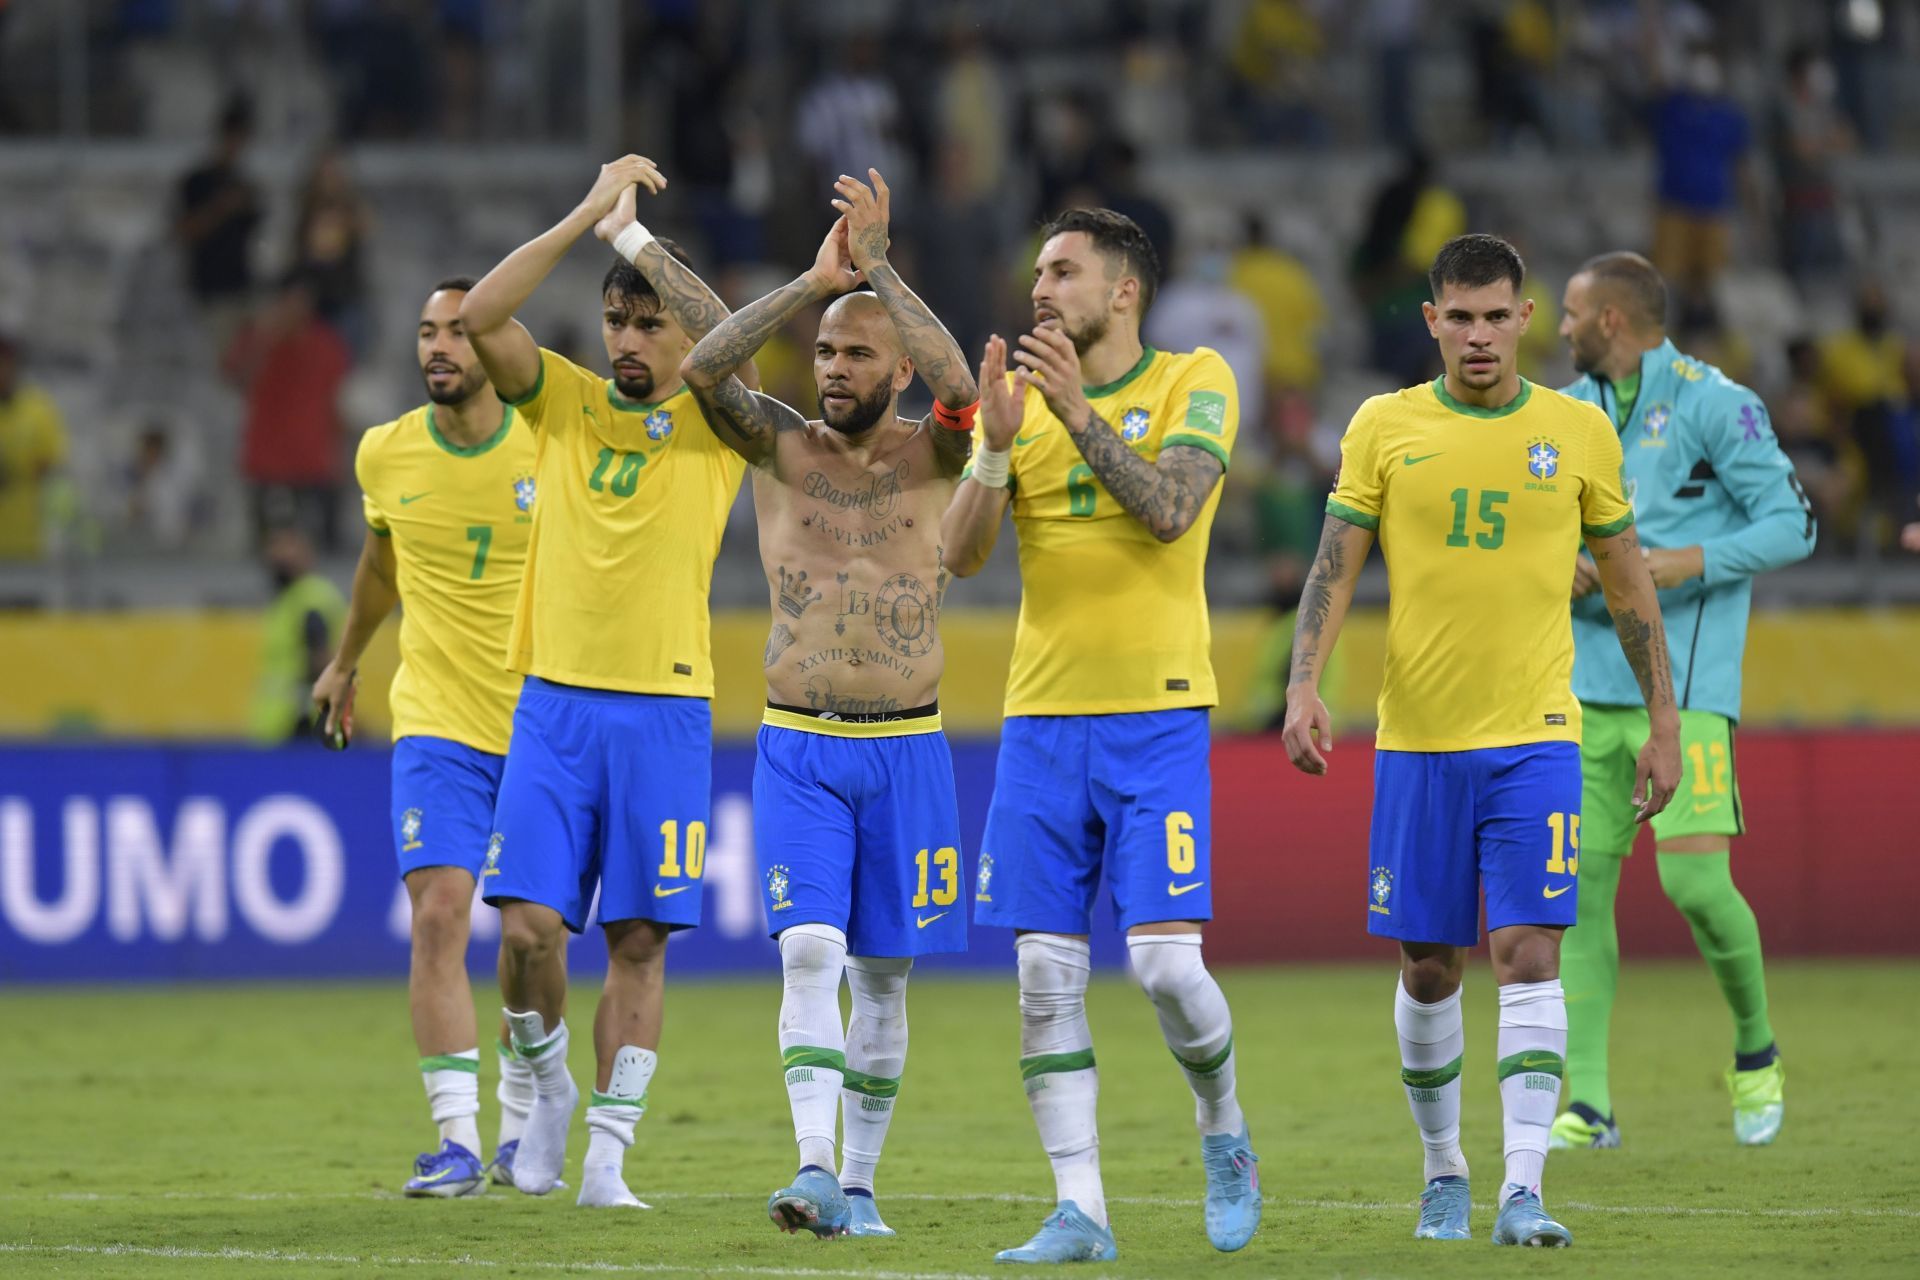 Brazil are first in the current rankings for international teams